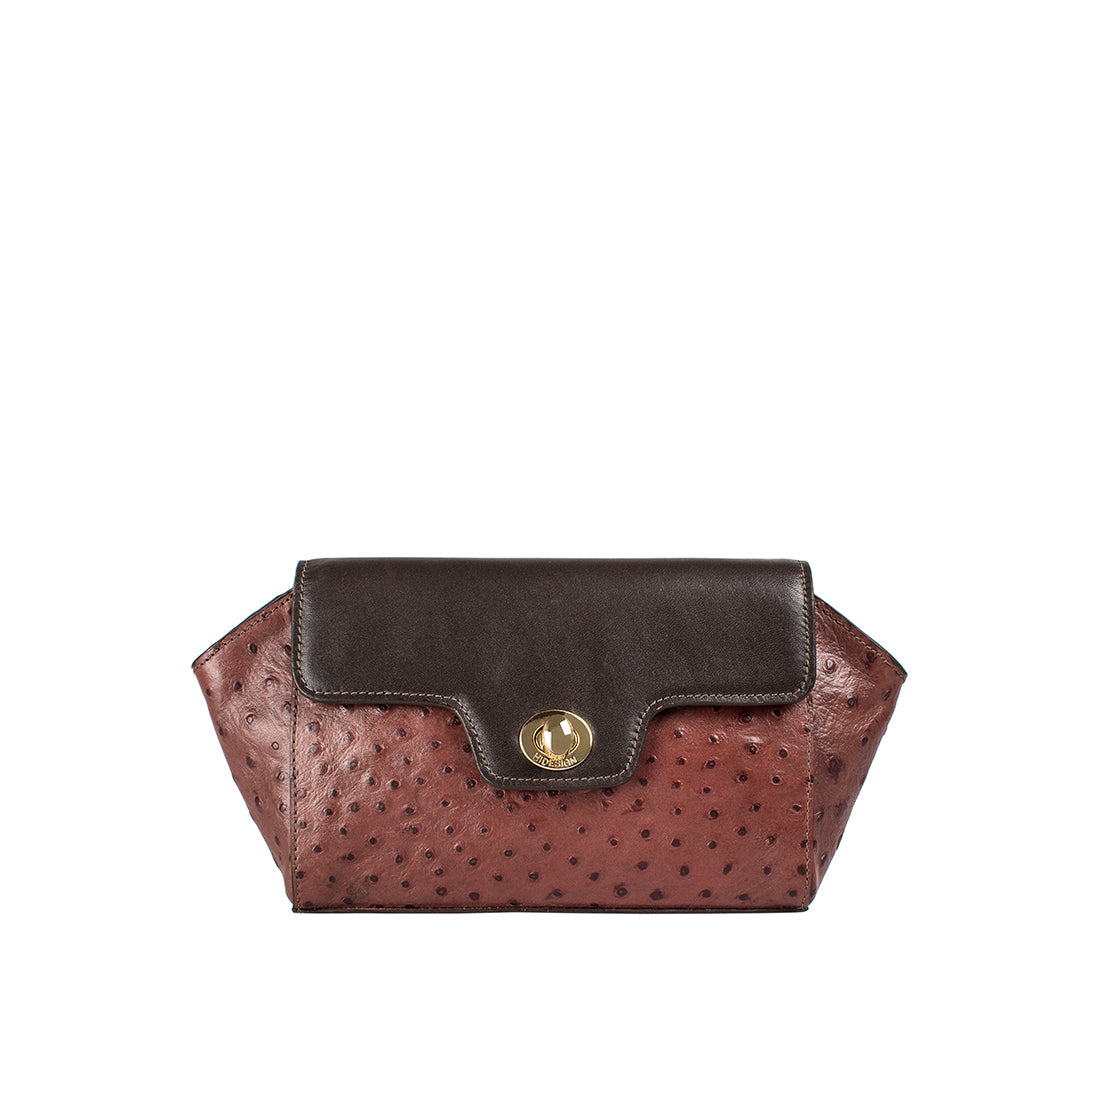 Hidesign Women Brown Leather Textured Zip Around Wallet Price in India,  Full Specifications & Offers | DTashion.com